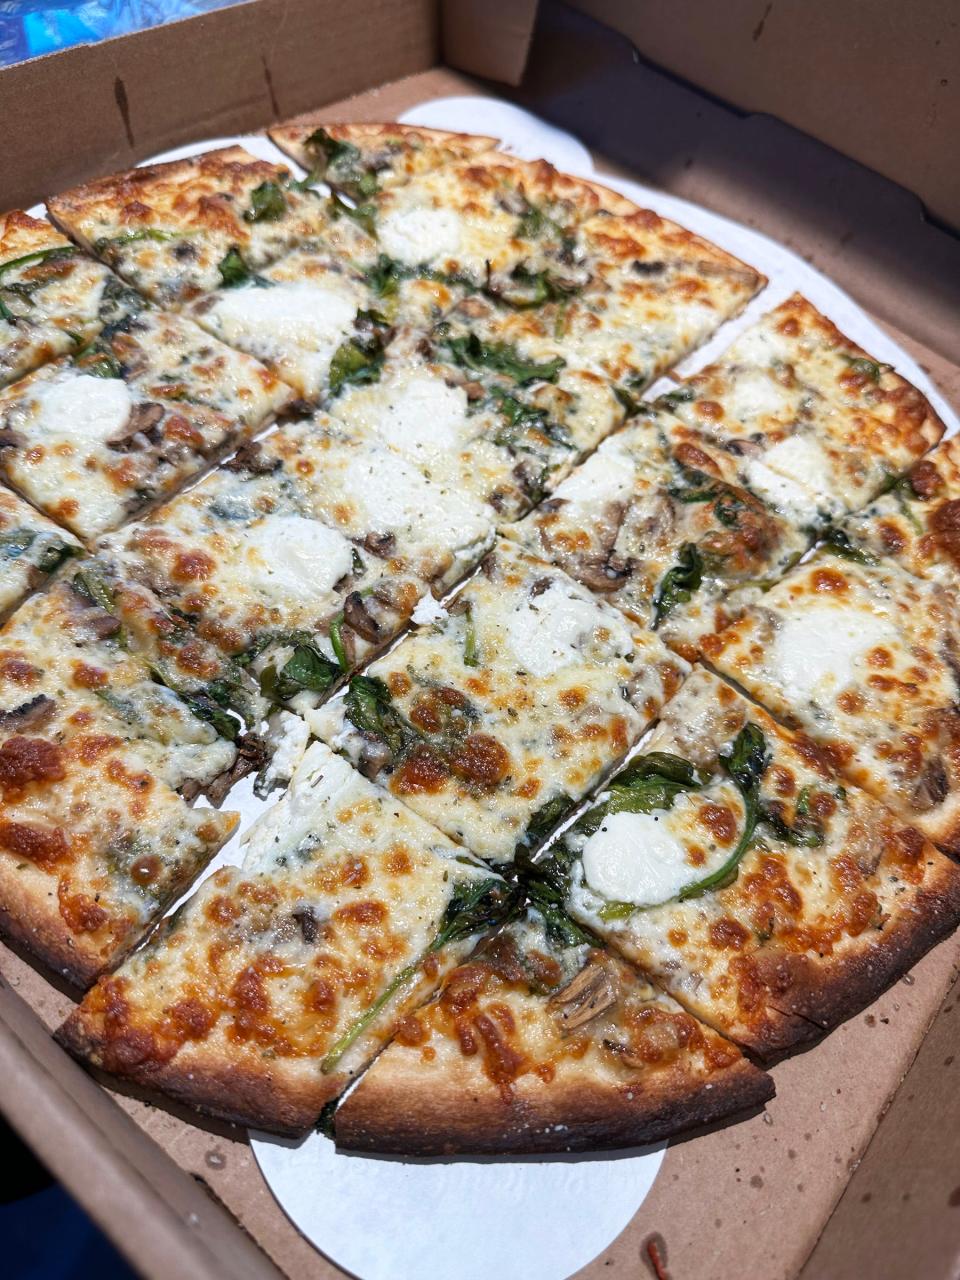 A “White Pizza” from The Mother Trucker Café, East Naples.